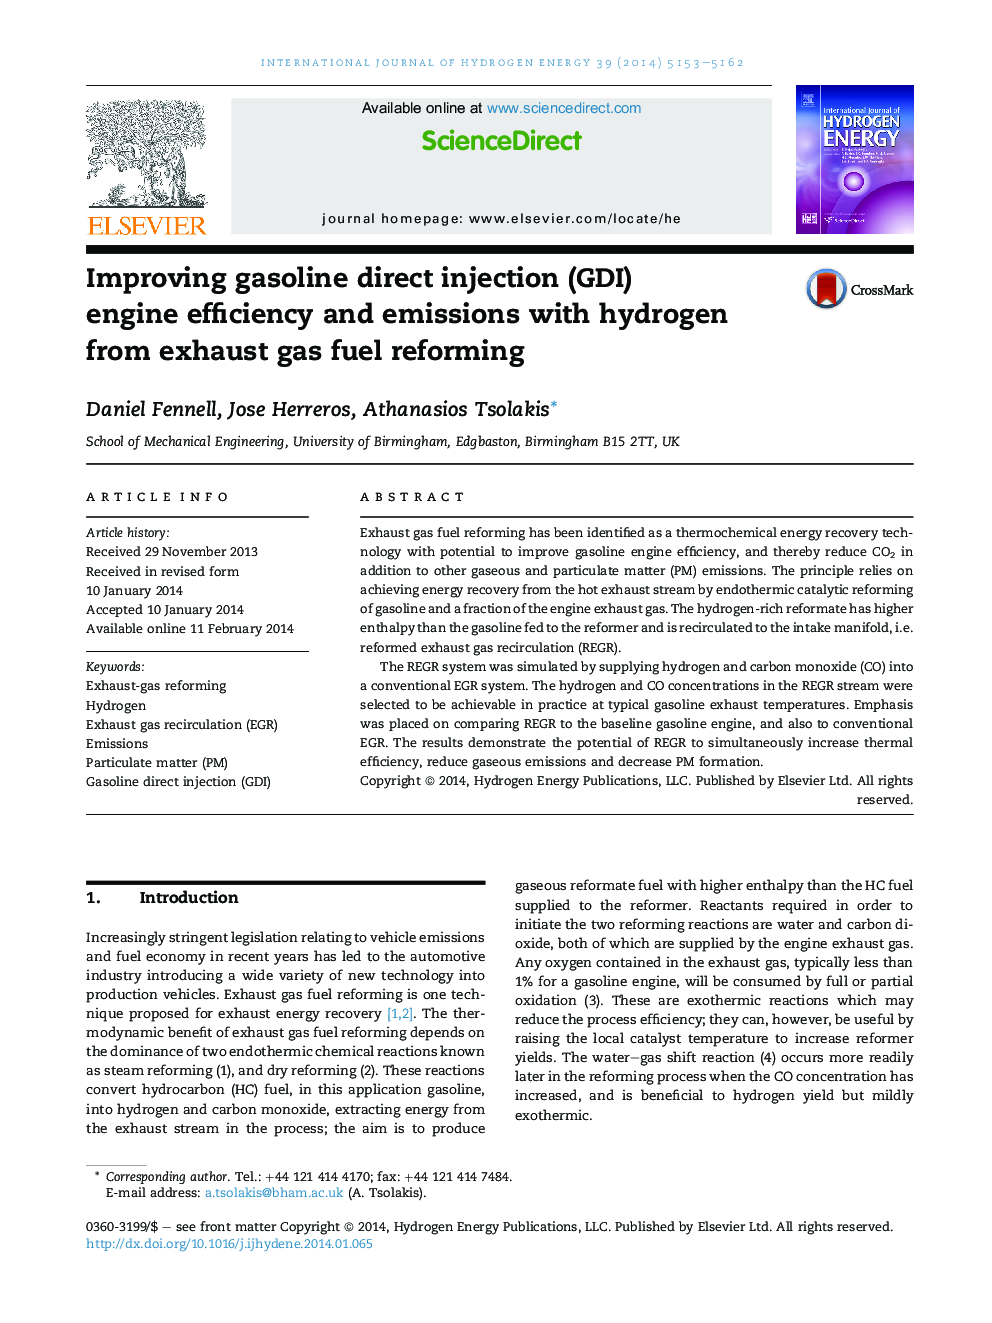 Improving gasoline direct injection (GDI) engine efficiency and emissions with hydrogen from exhaust gas fuel reforming